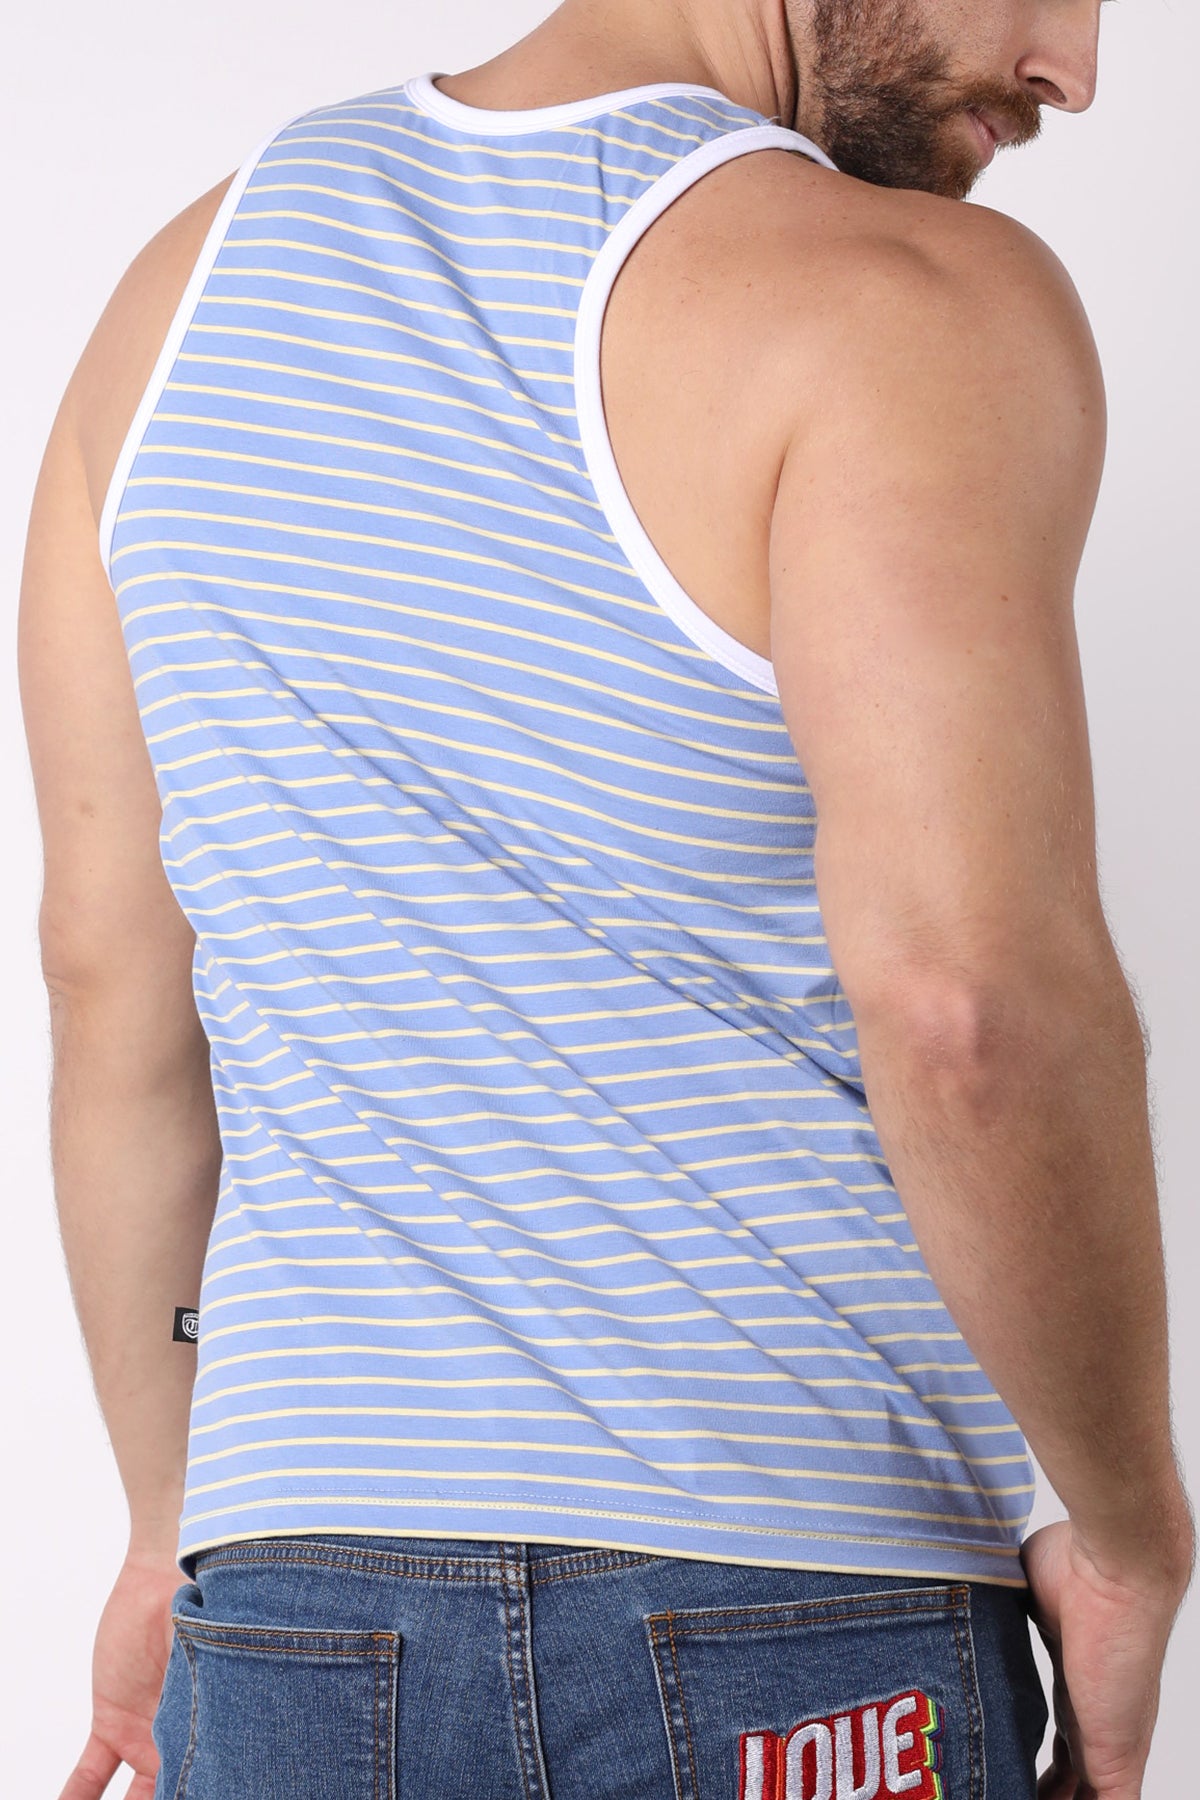 Coral Sands Striped Tank Top - TIMOTEO